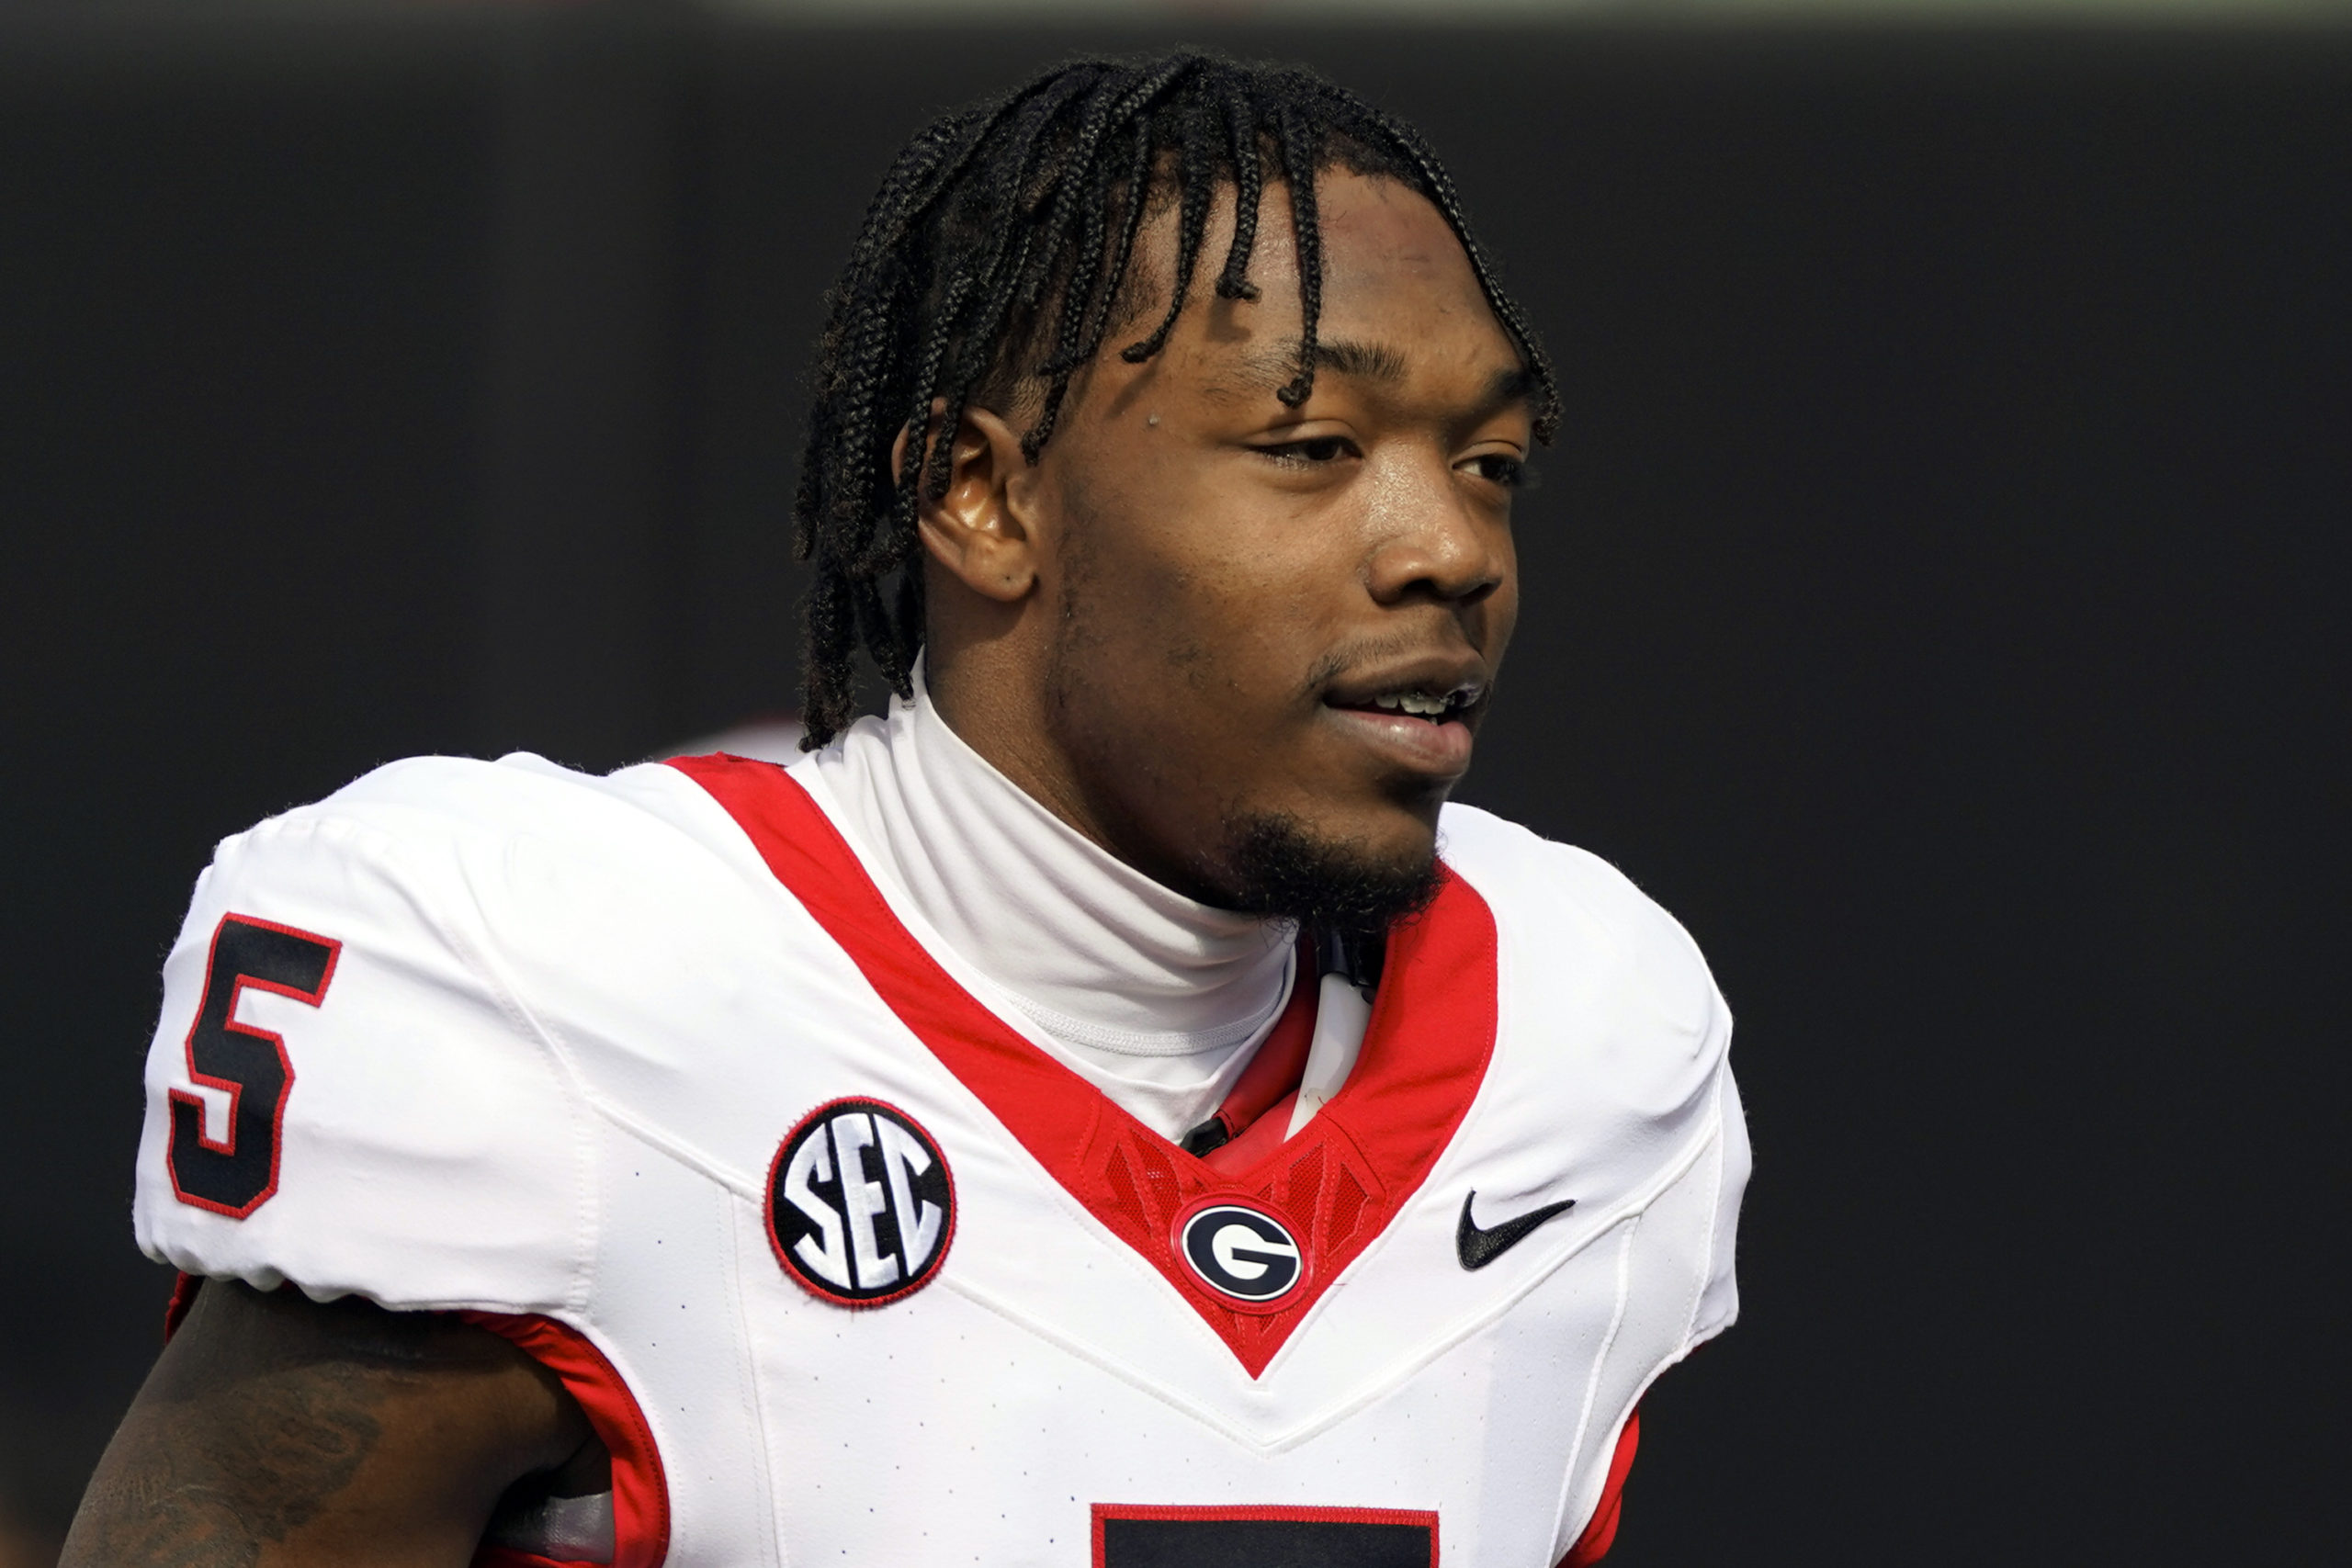 Georgia Wide Receiver Arrested on Charges of Cruelty to Children